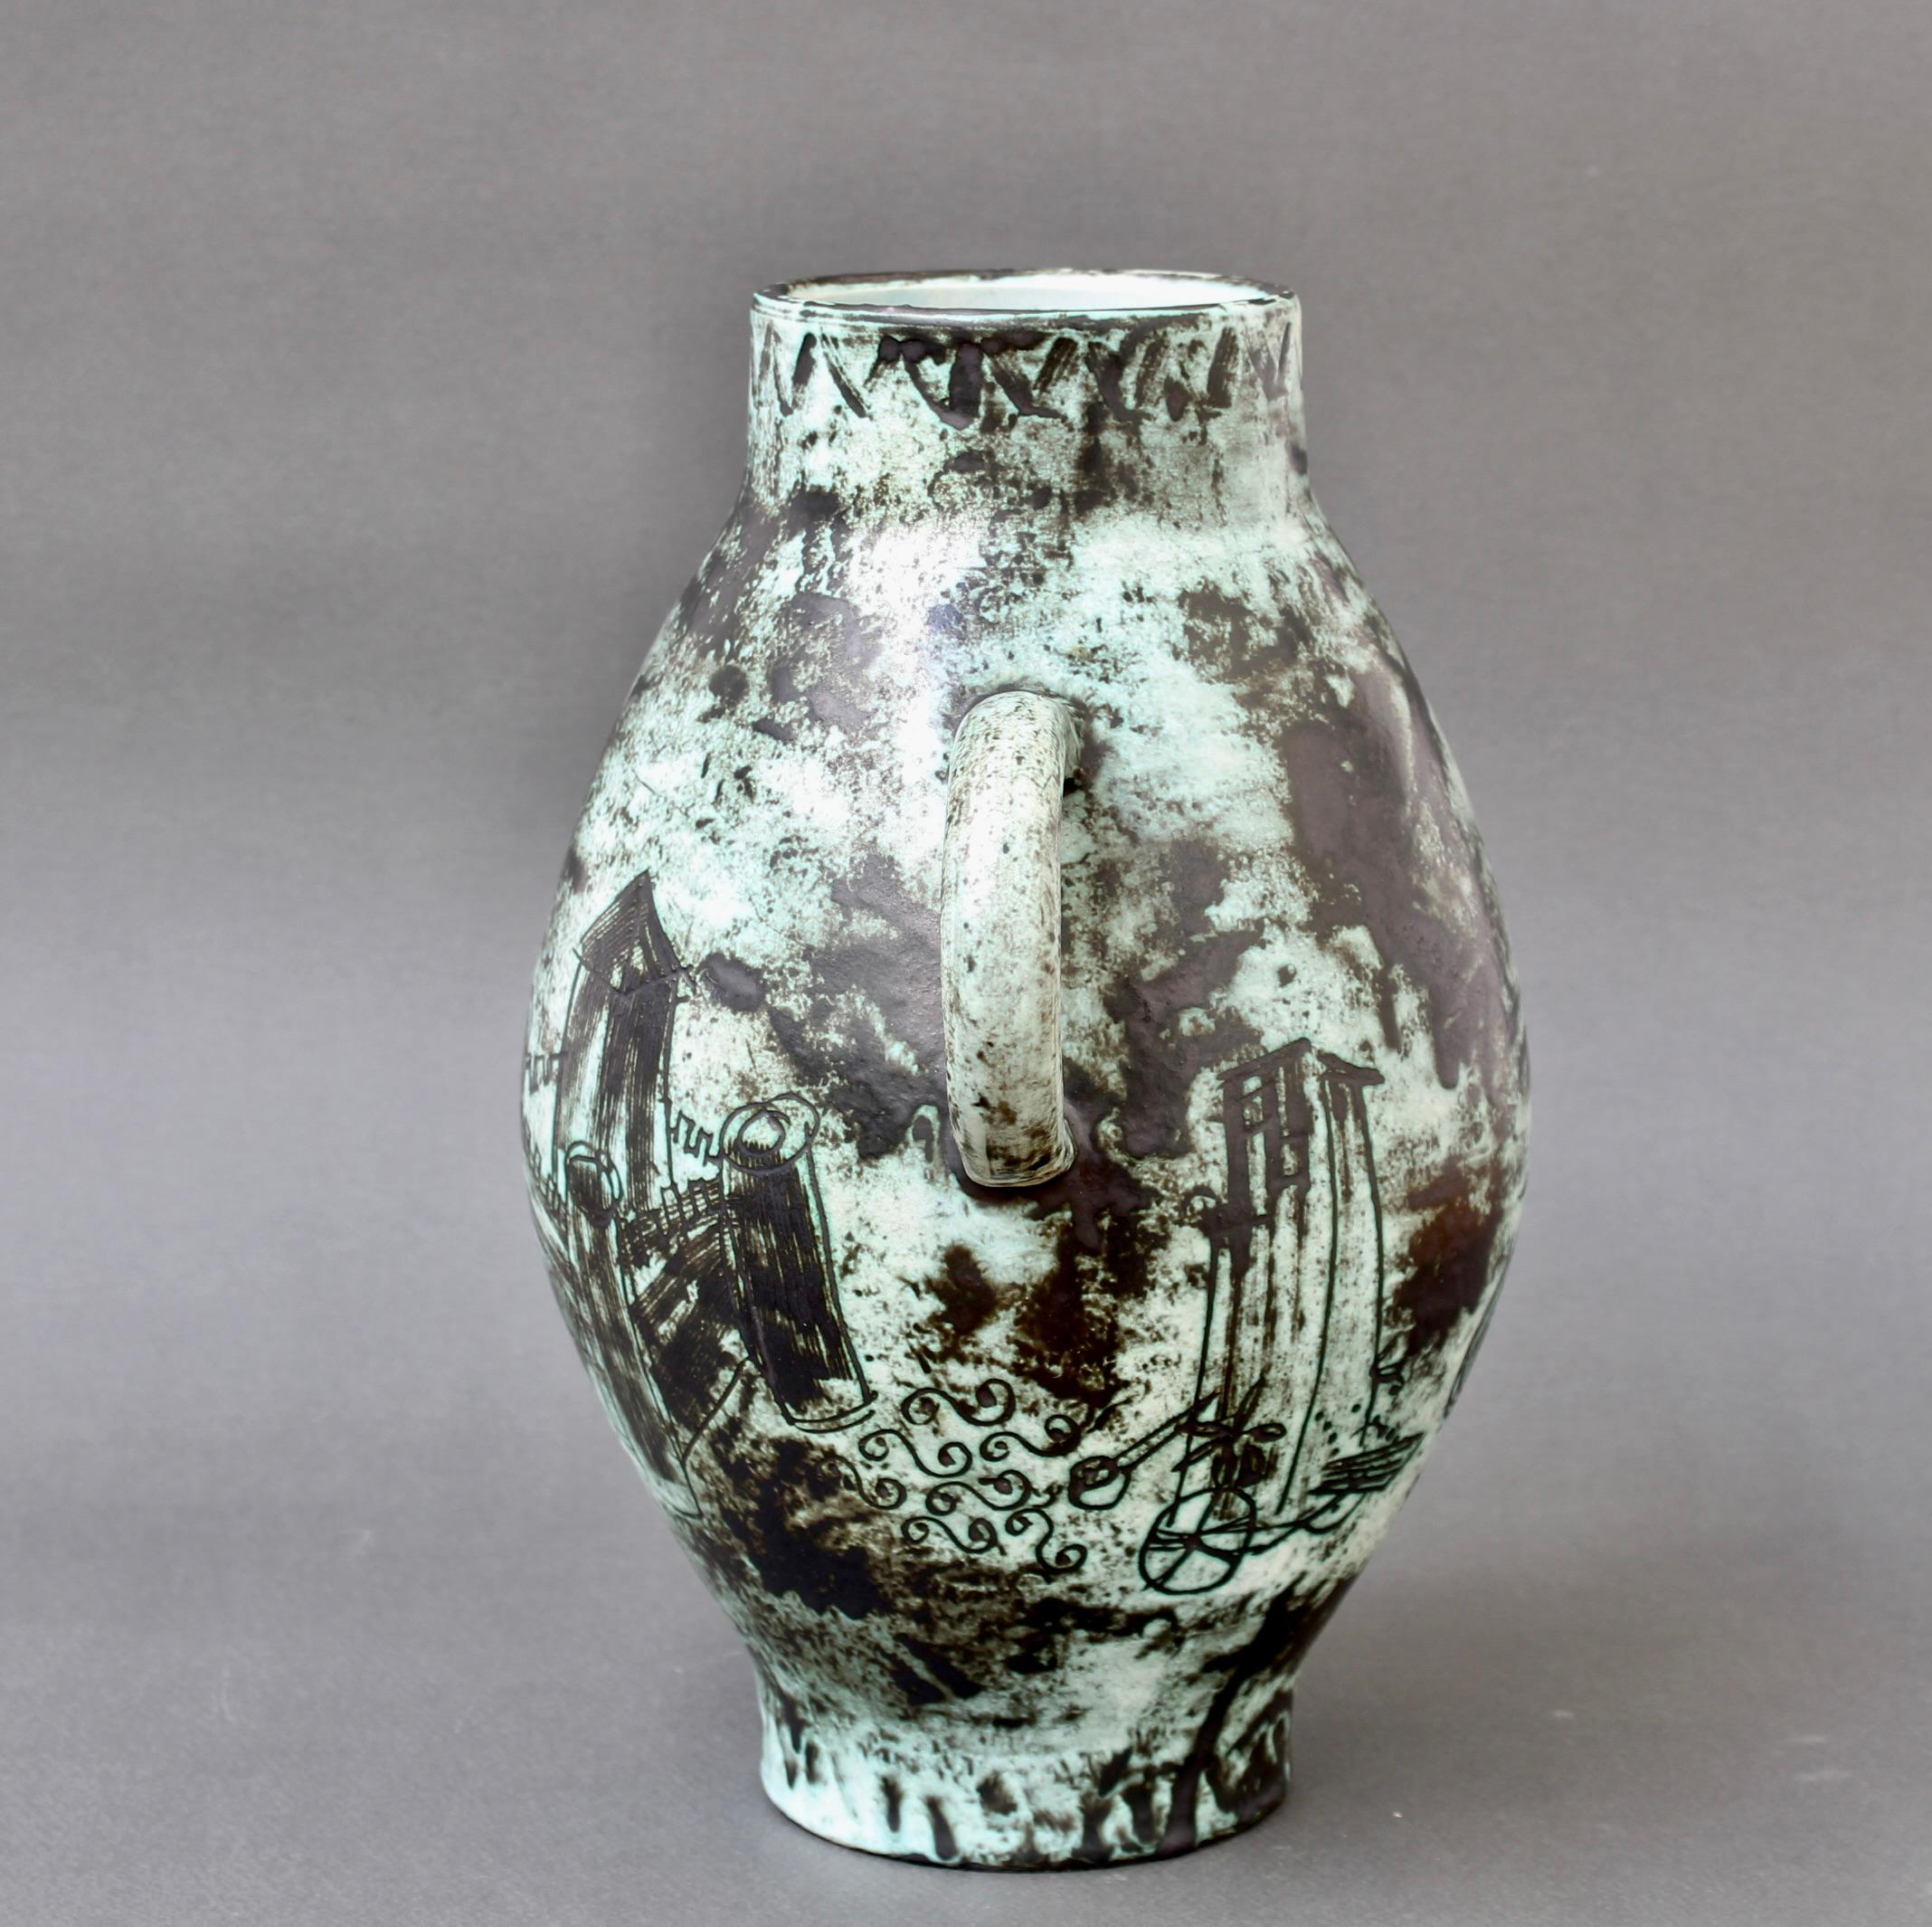 Vintage French Ceramic Vase by Jacques Blin (circa 1950s) For Sale 3